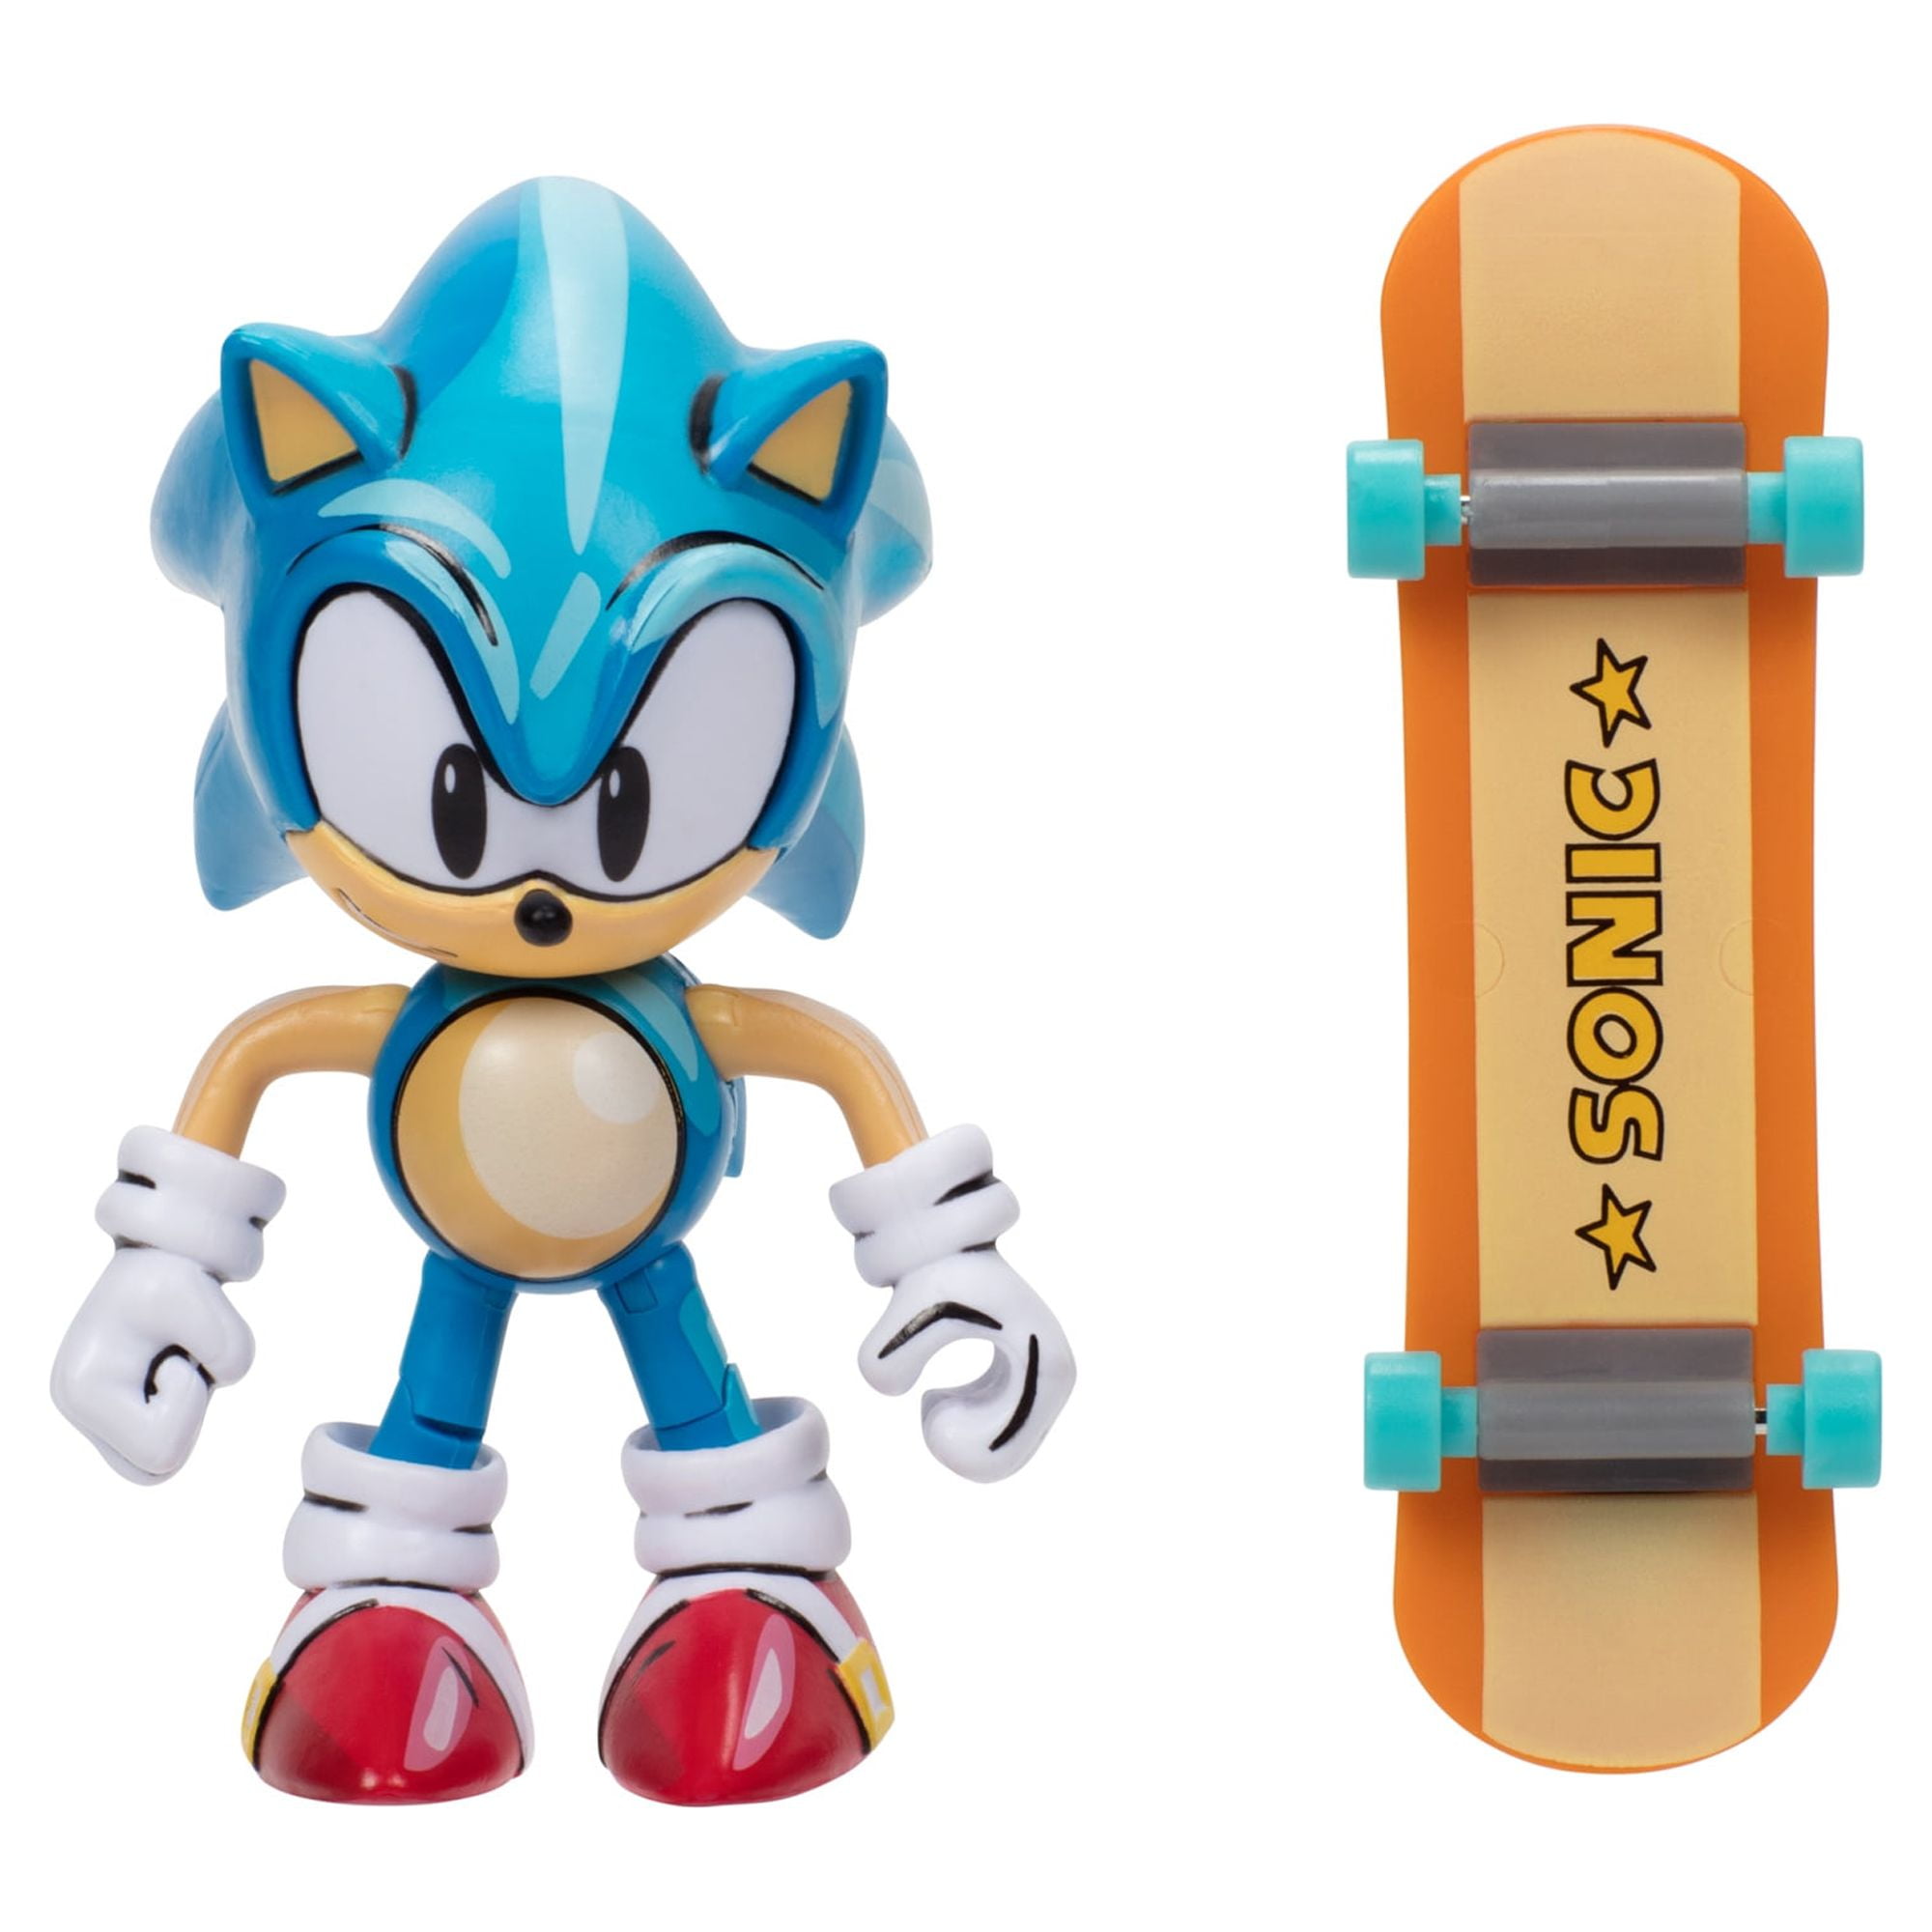 Sonic the Hedgehog 4 JAKKS Gold Collector Action Figure - Metal Sonic with  Super Ring Item Box with 11 Points of Articulation